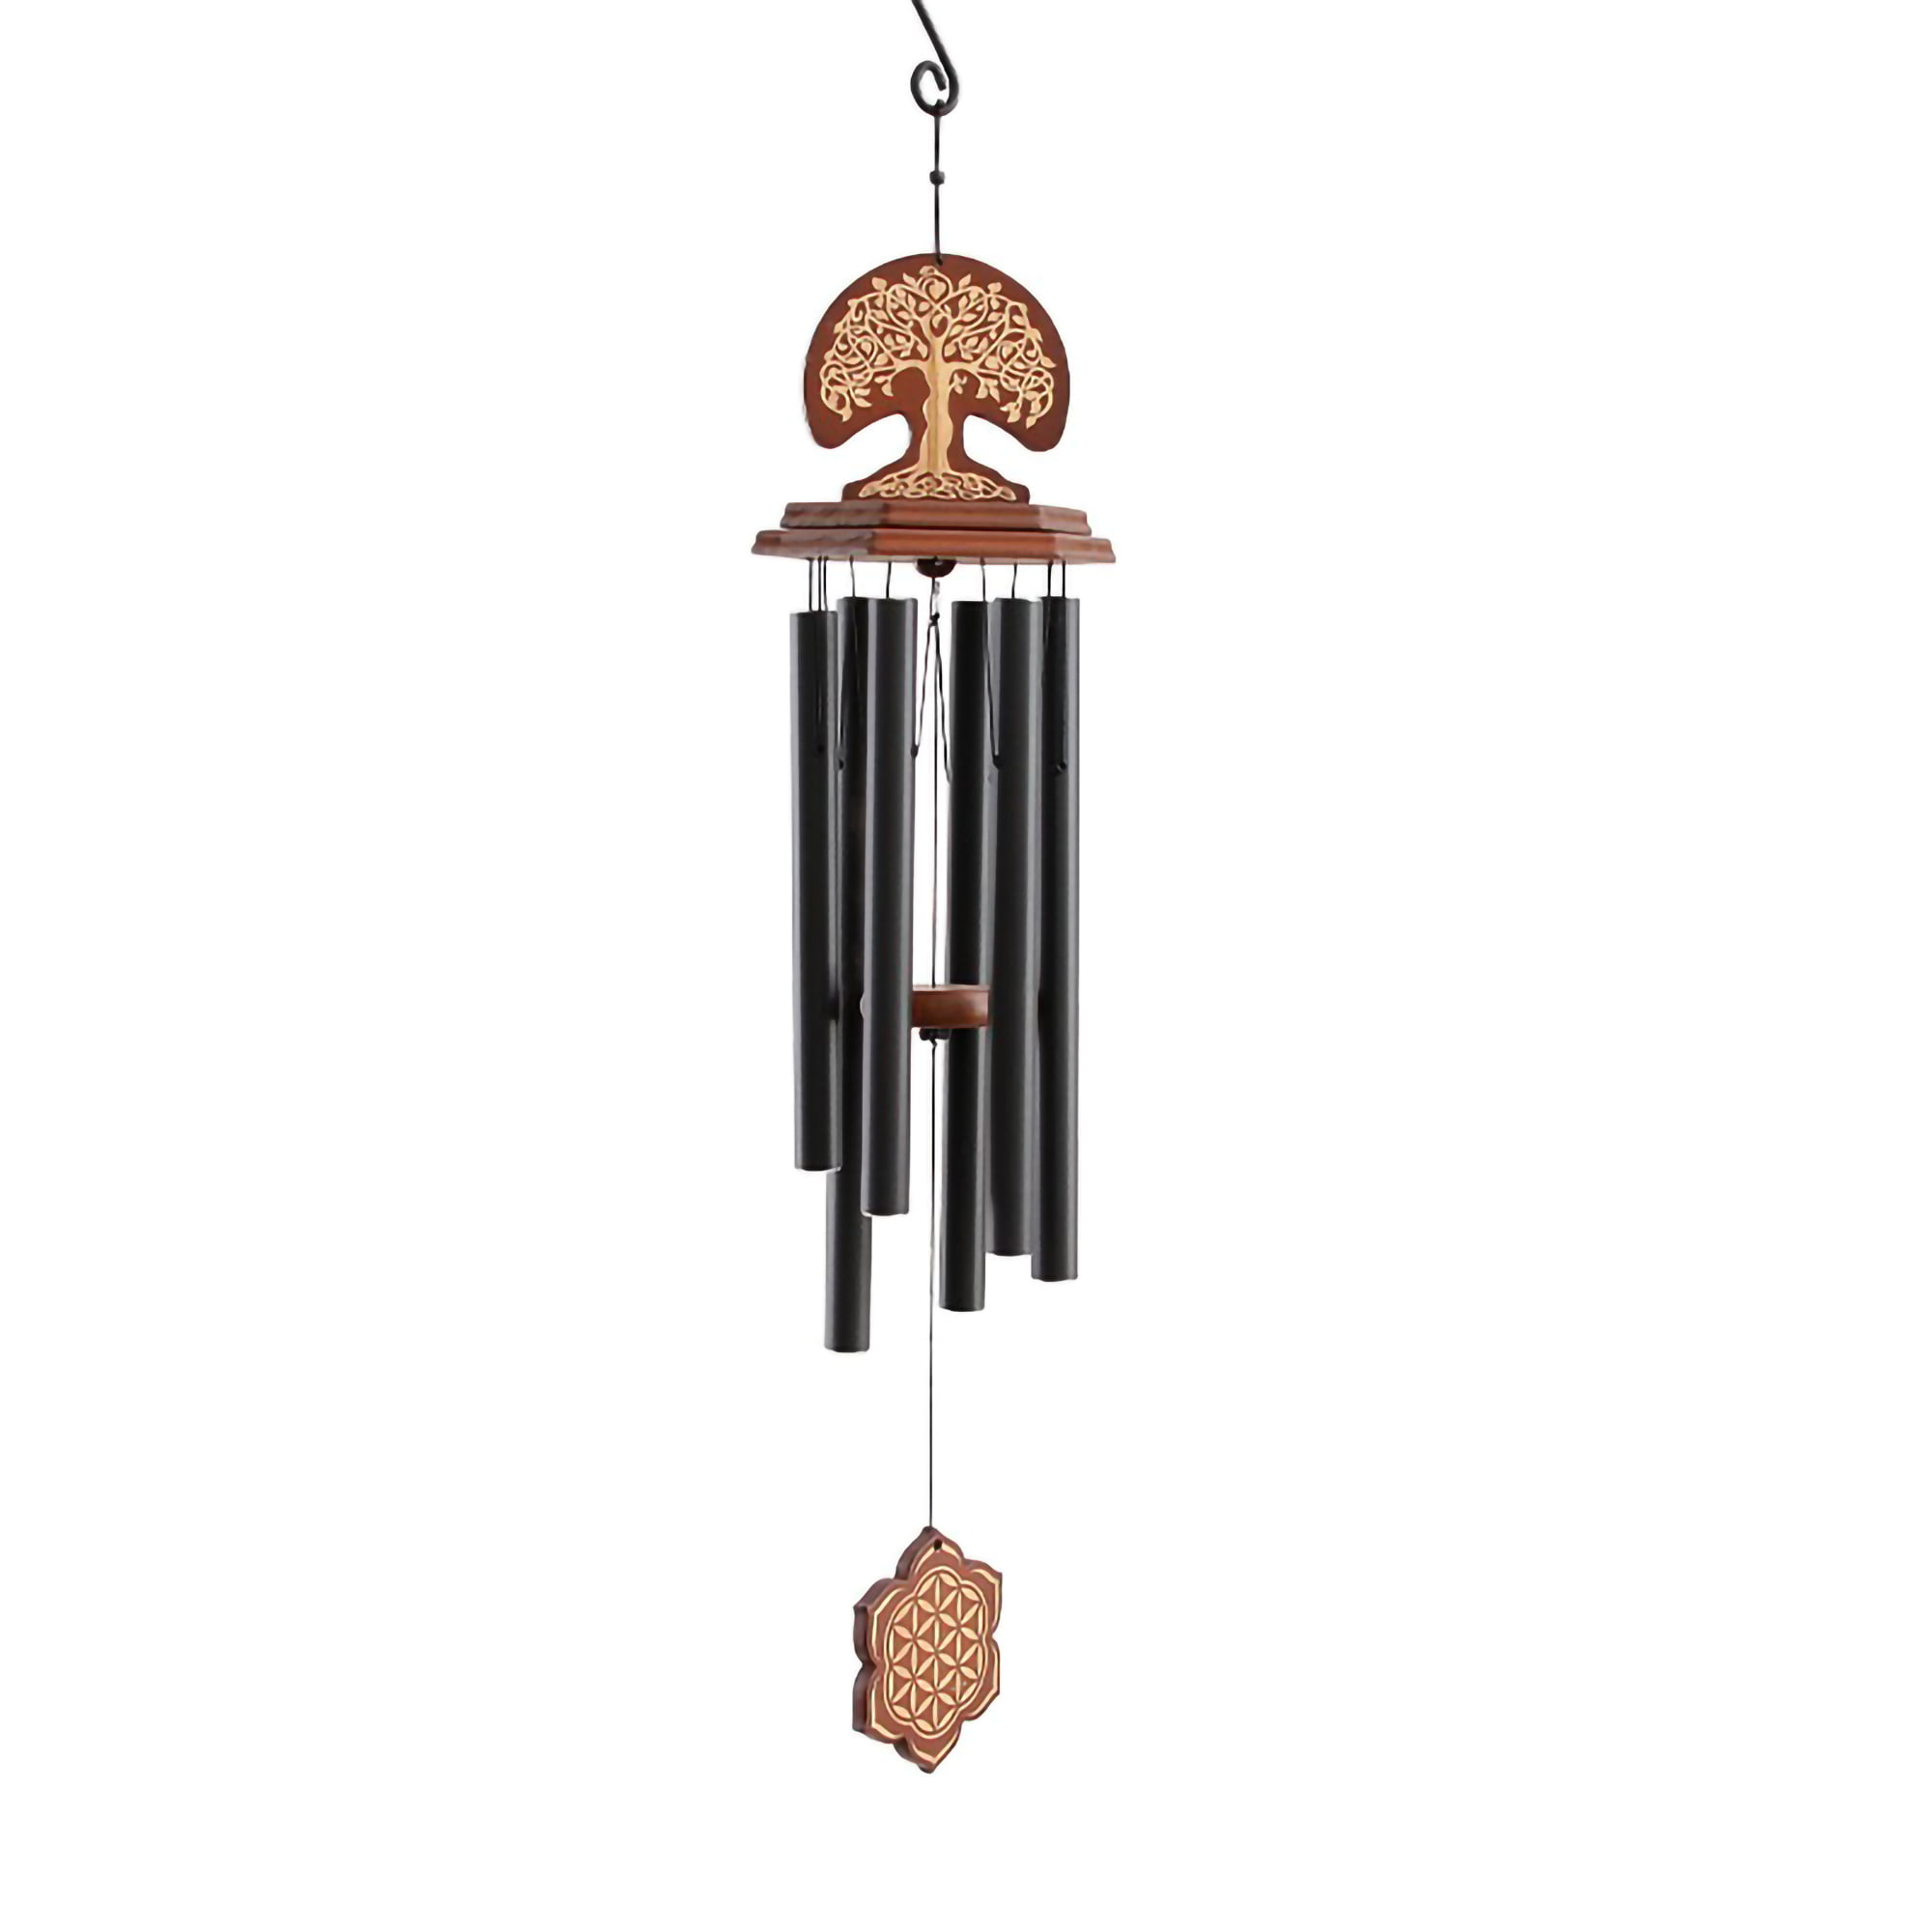 Details about   1pc Aluminium Tube Wind Chime Aeolian Bells Craft for Home Garden Hangi 